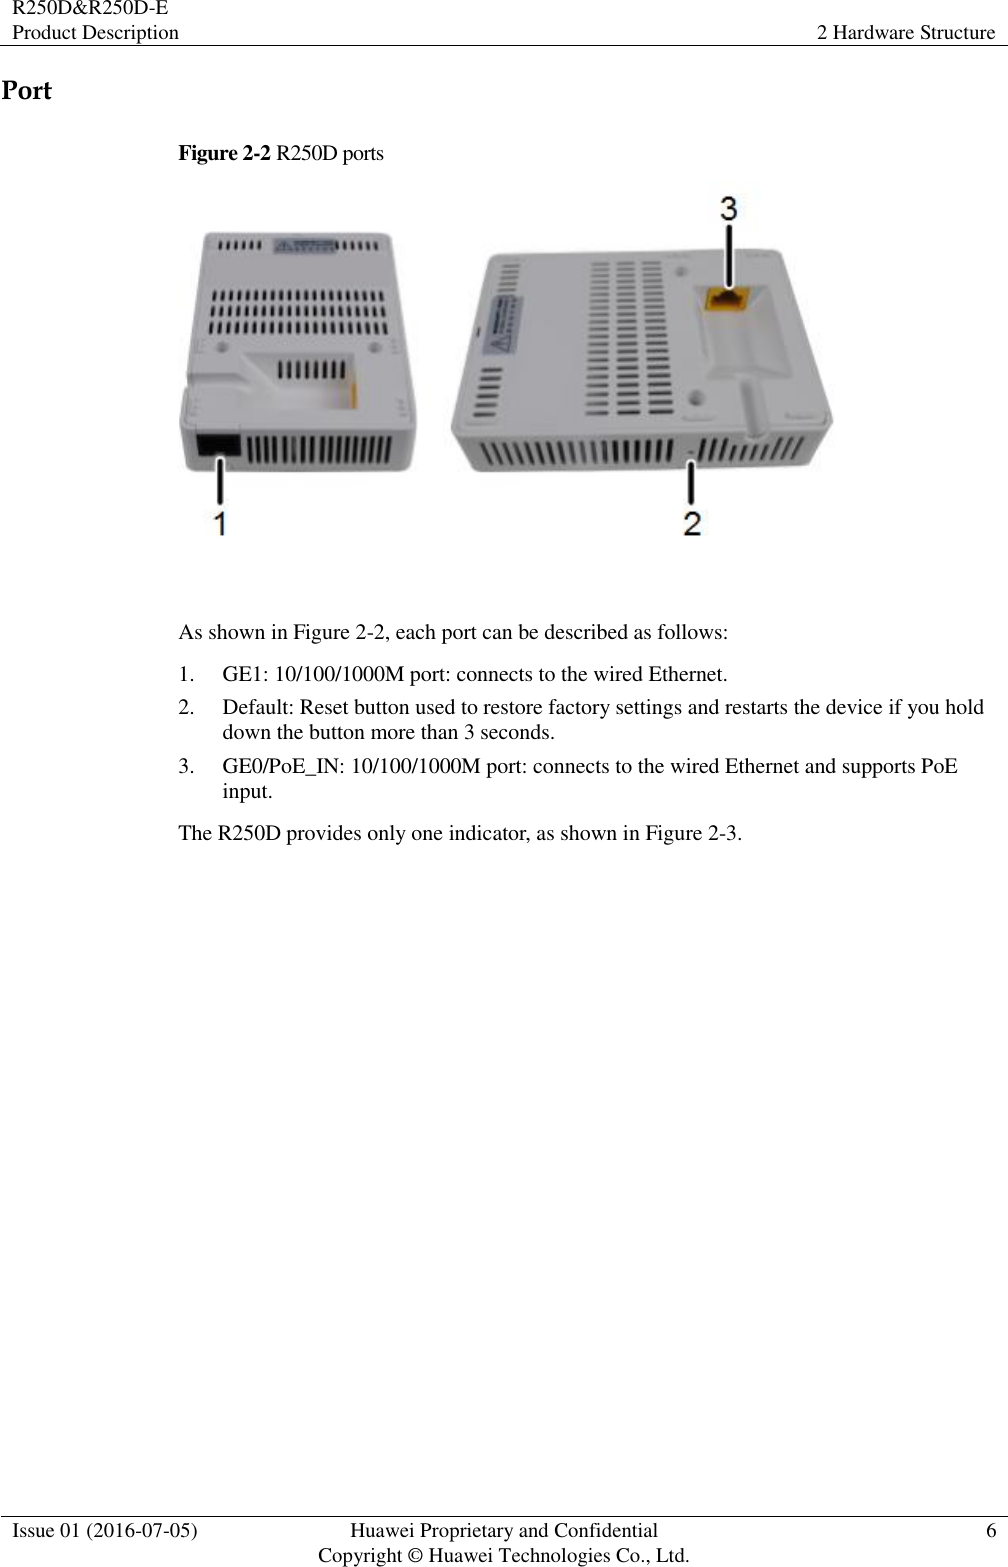 R250D&amp;R250D-E Product Description 2 Hardware Structure  Issue 01 (2016-07-05) Huawei Proprietary and Confidential                                     Copyright © Huawei Technologies Co., Ltd. 6  Port Figure 2-2 R250D ports   As shown in Figure 2-2, each port can be described as follows: 1. GE1: 10/100/1000M port: connects to the wired Ethernet. 2. Default: Reset button used to restore factory settings and restarts the device if you hold down the button more than 3 seconds. 3. GE0/PoE_IN: 10/100/1000M port: connects to the wired Ethernet and supports PoE input. The R250D provides only one indicator, as shown in Figure 2-3. 